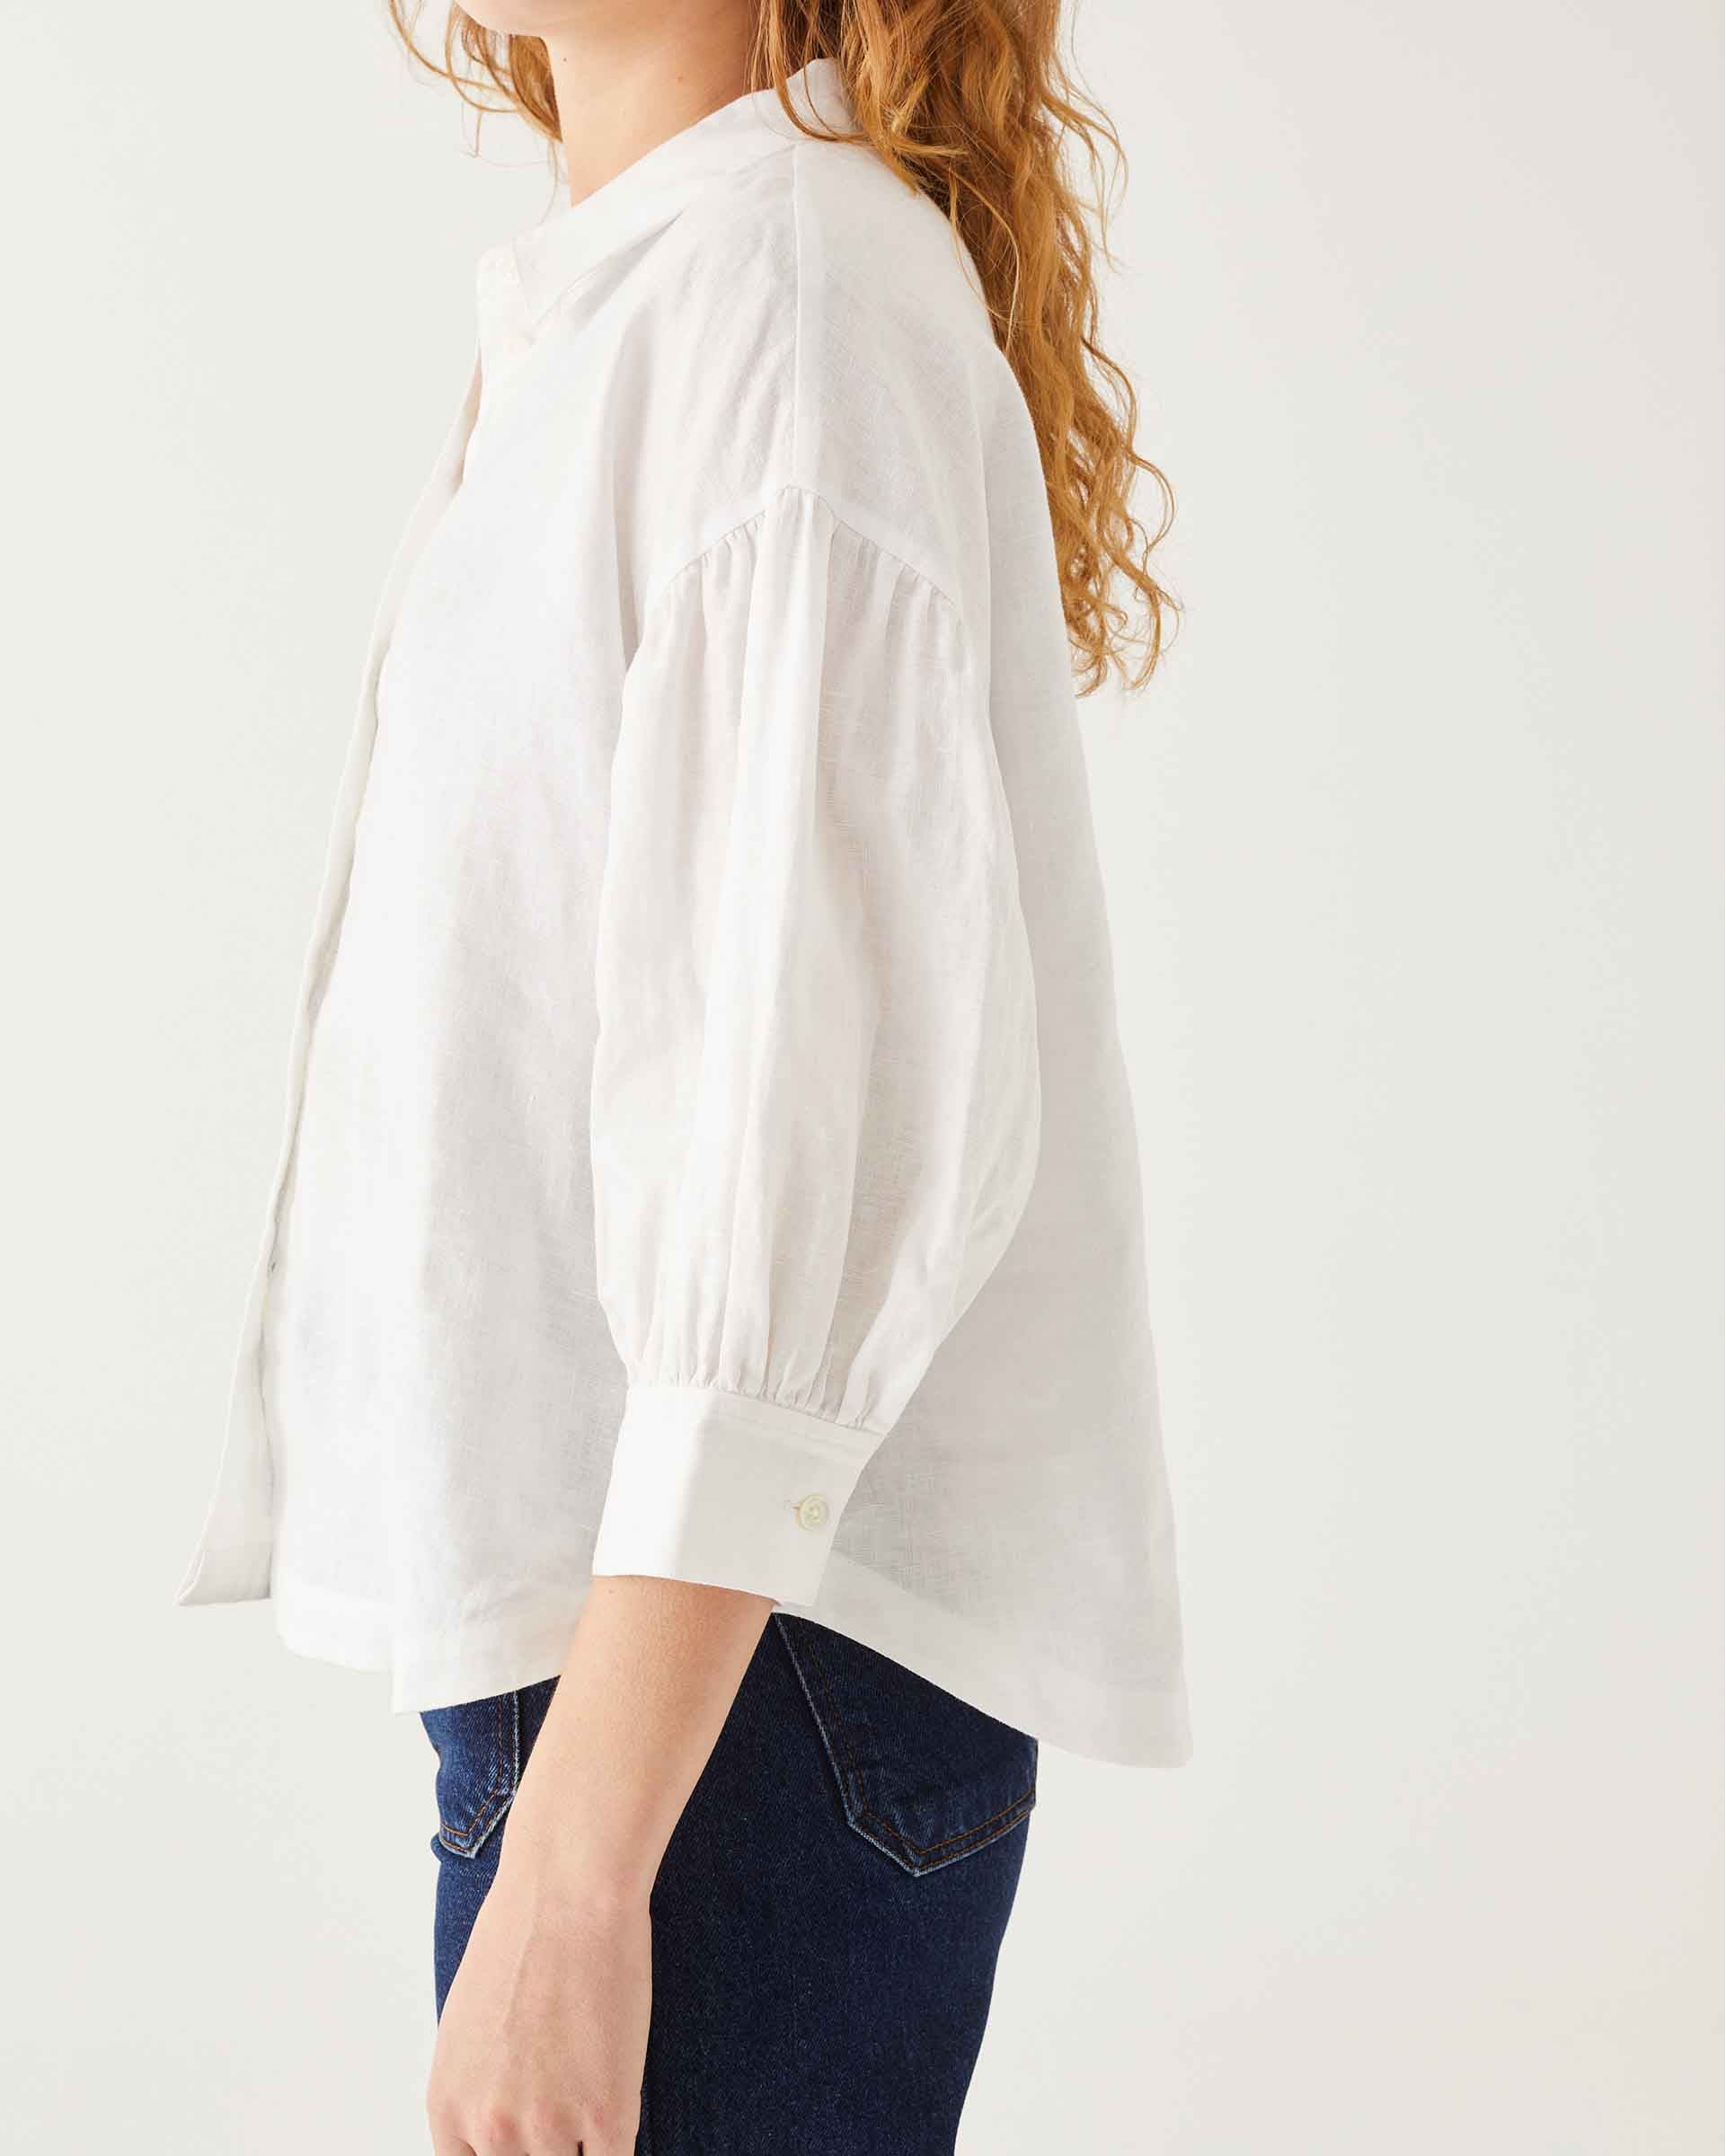 side detail of female wearing white linen shirt with button-down and collar on white background